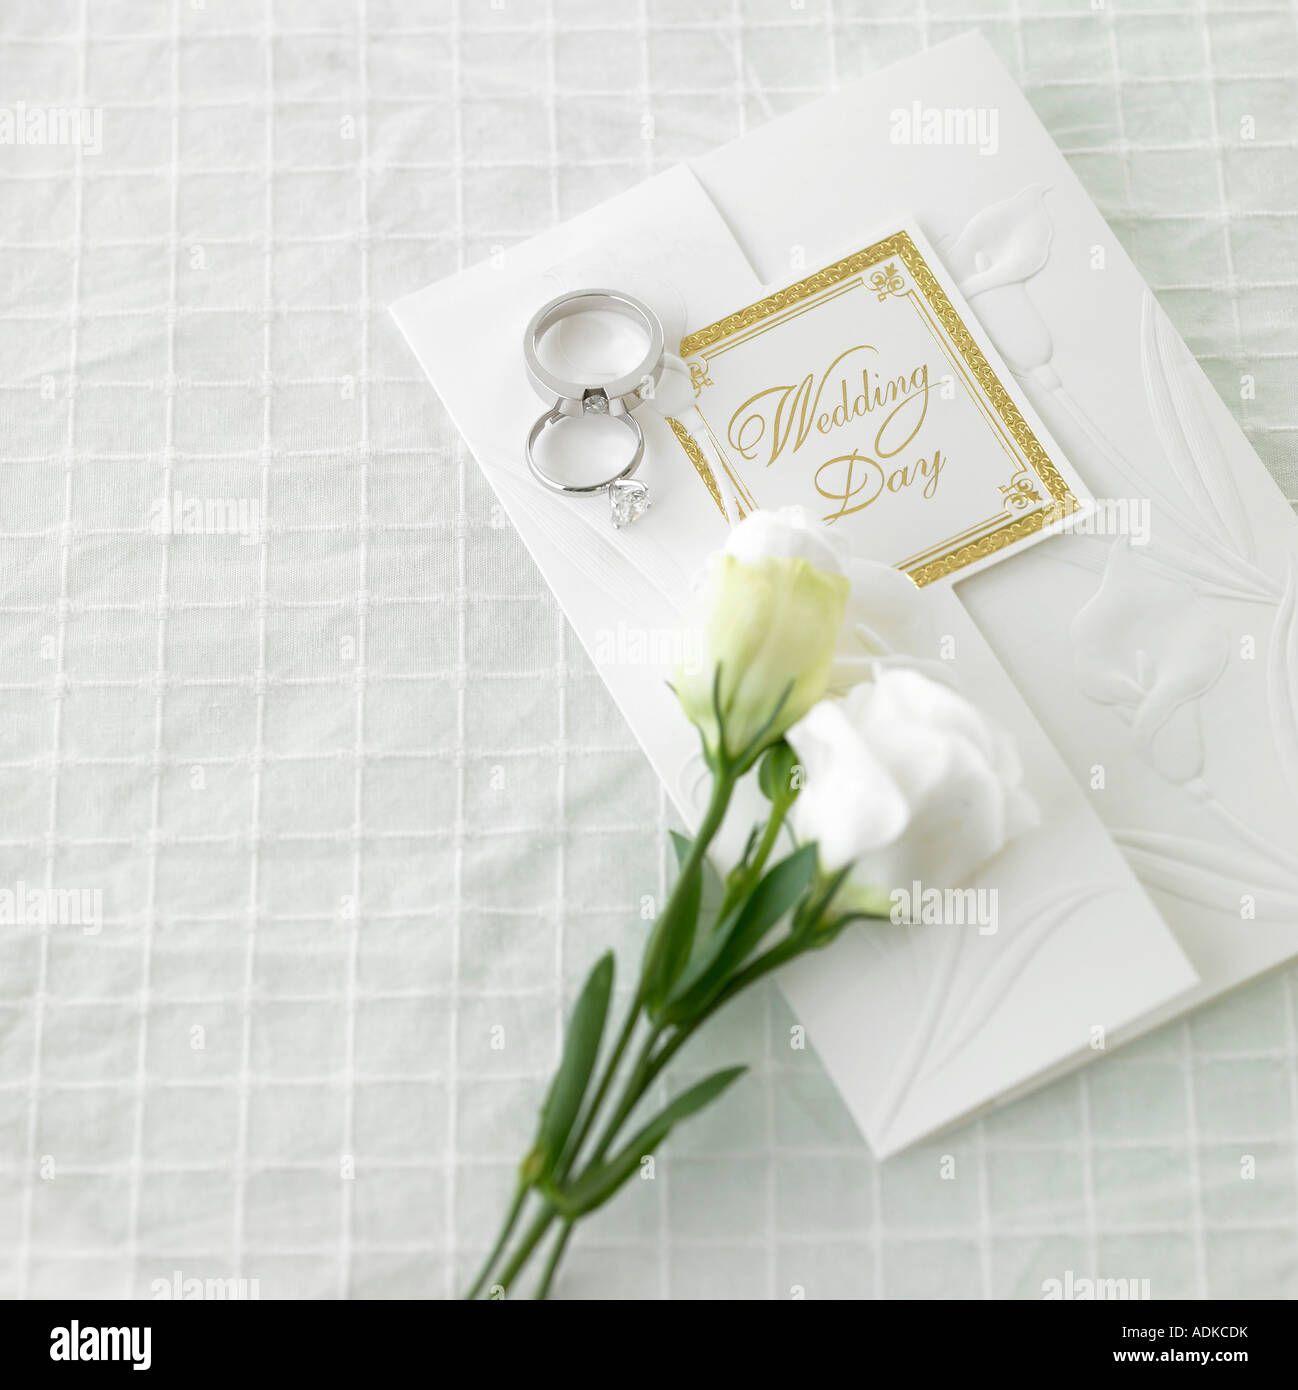 an invitation a wedding ring and a flower on the wedding veil Stock Photo